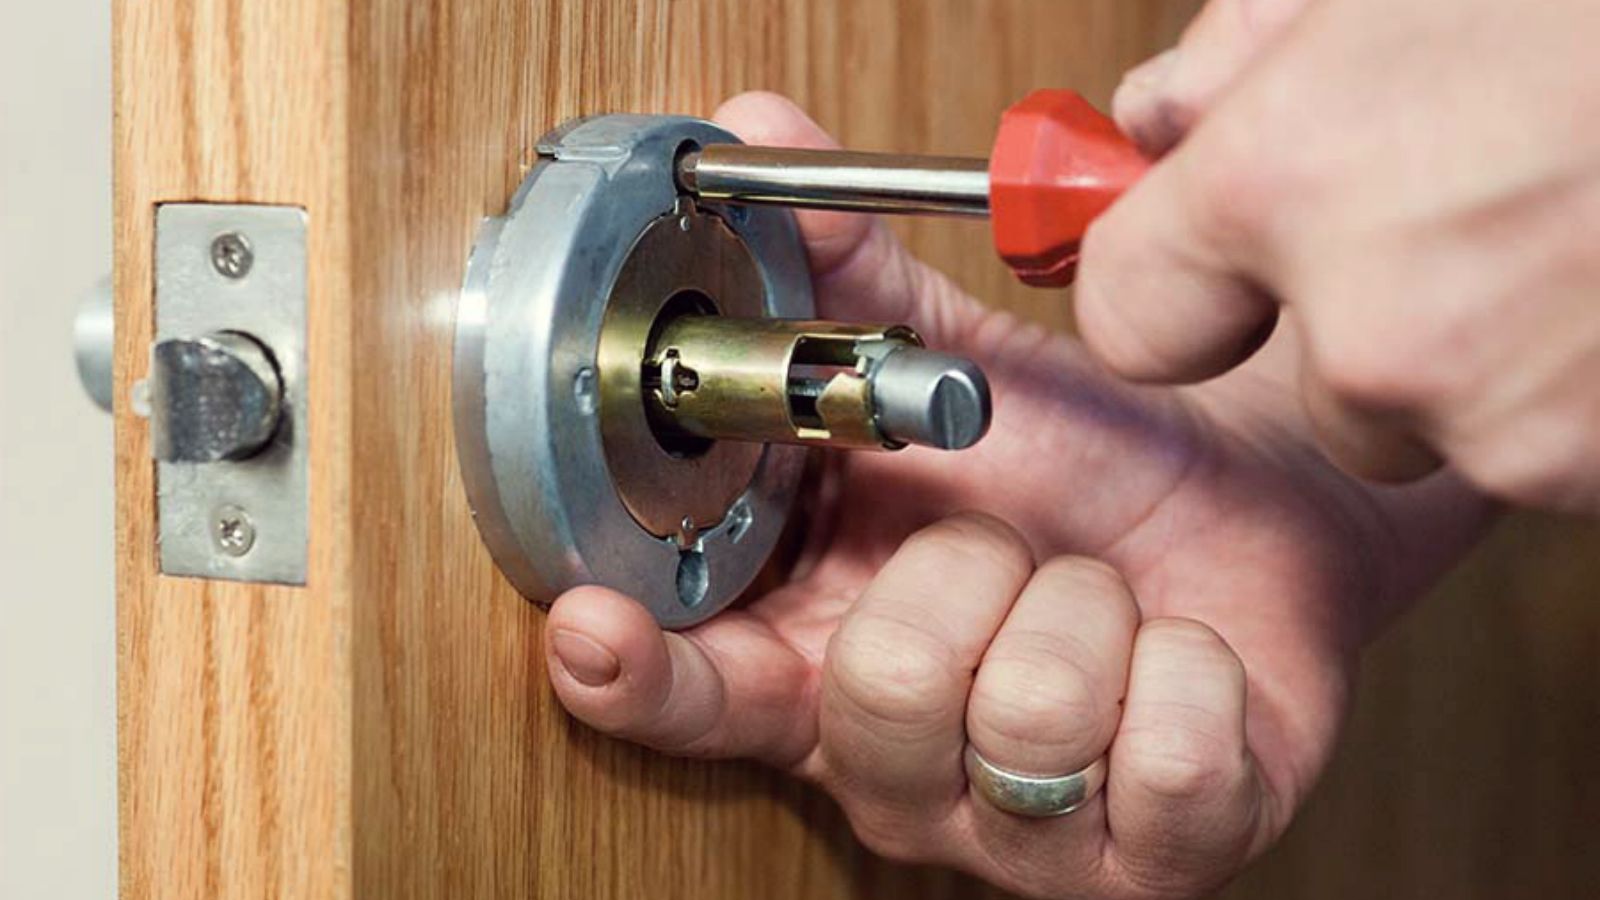 Why is good to replace your locks frequently and how to choose the best company?